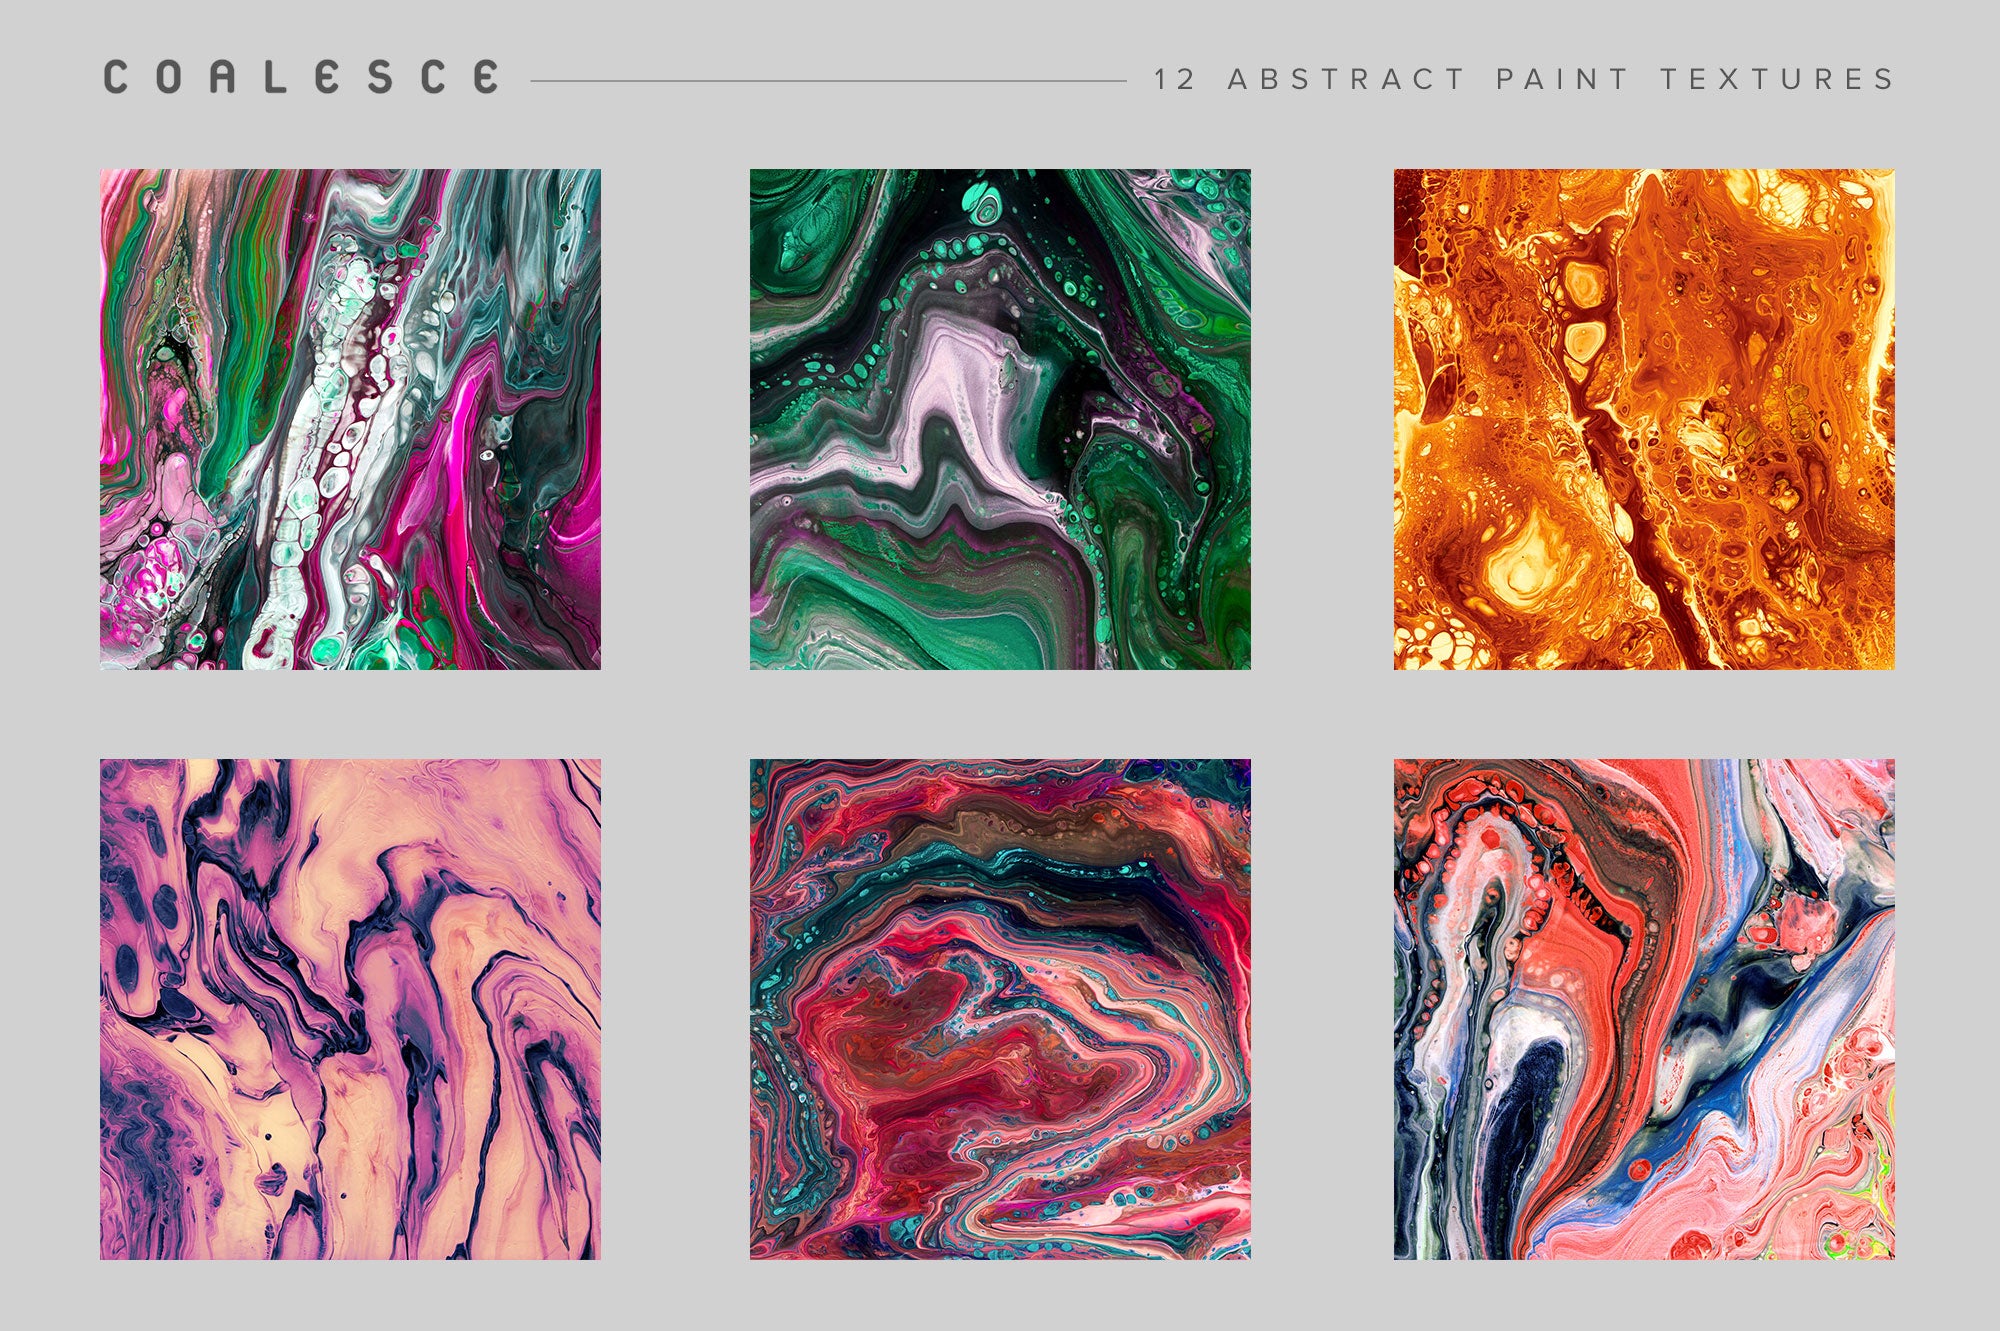 Coalesce: 12 Abstract Paint Textures